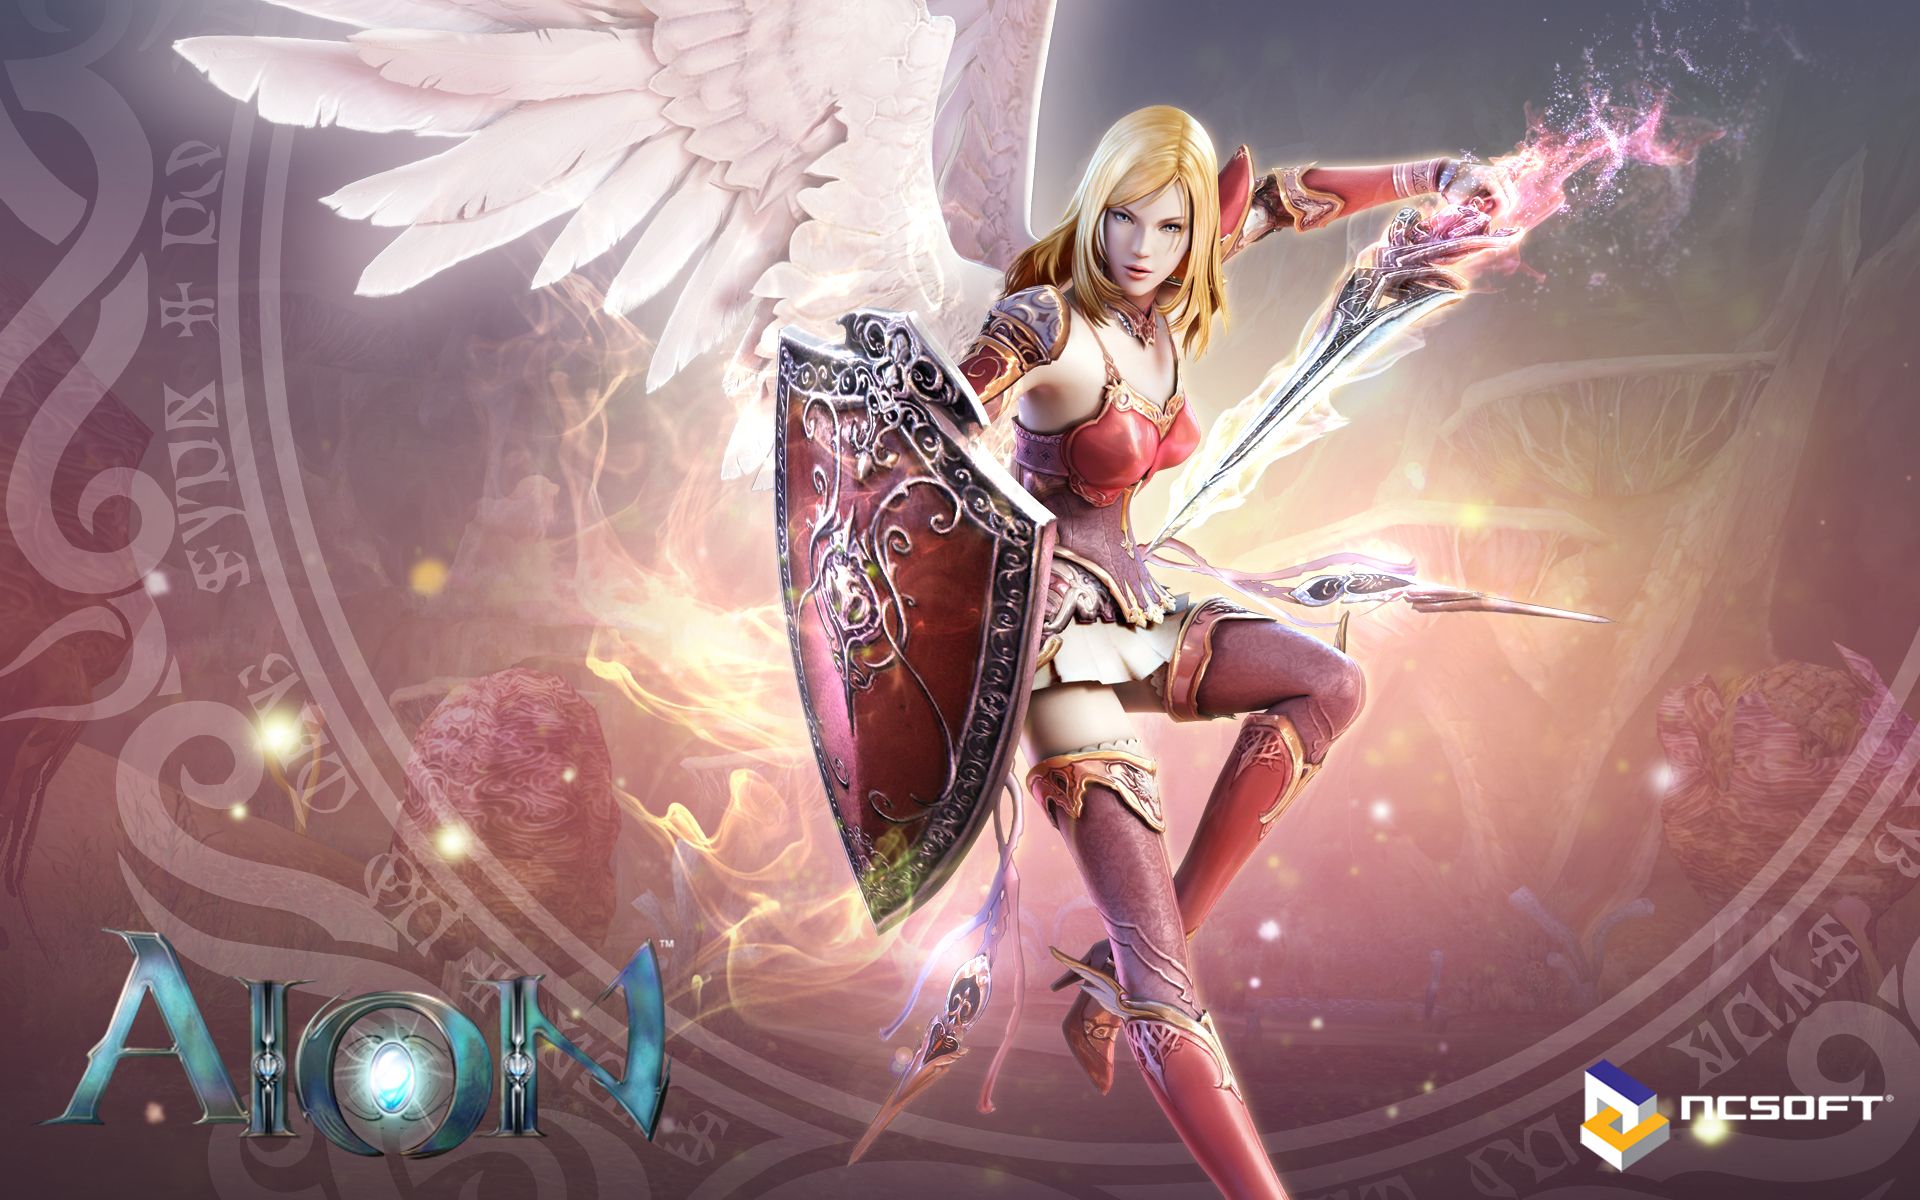 AION Wallpapers, reviews, gameplay videos, screenshots here in